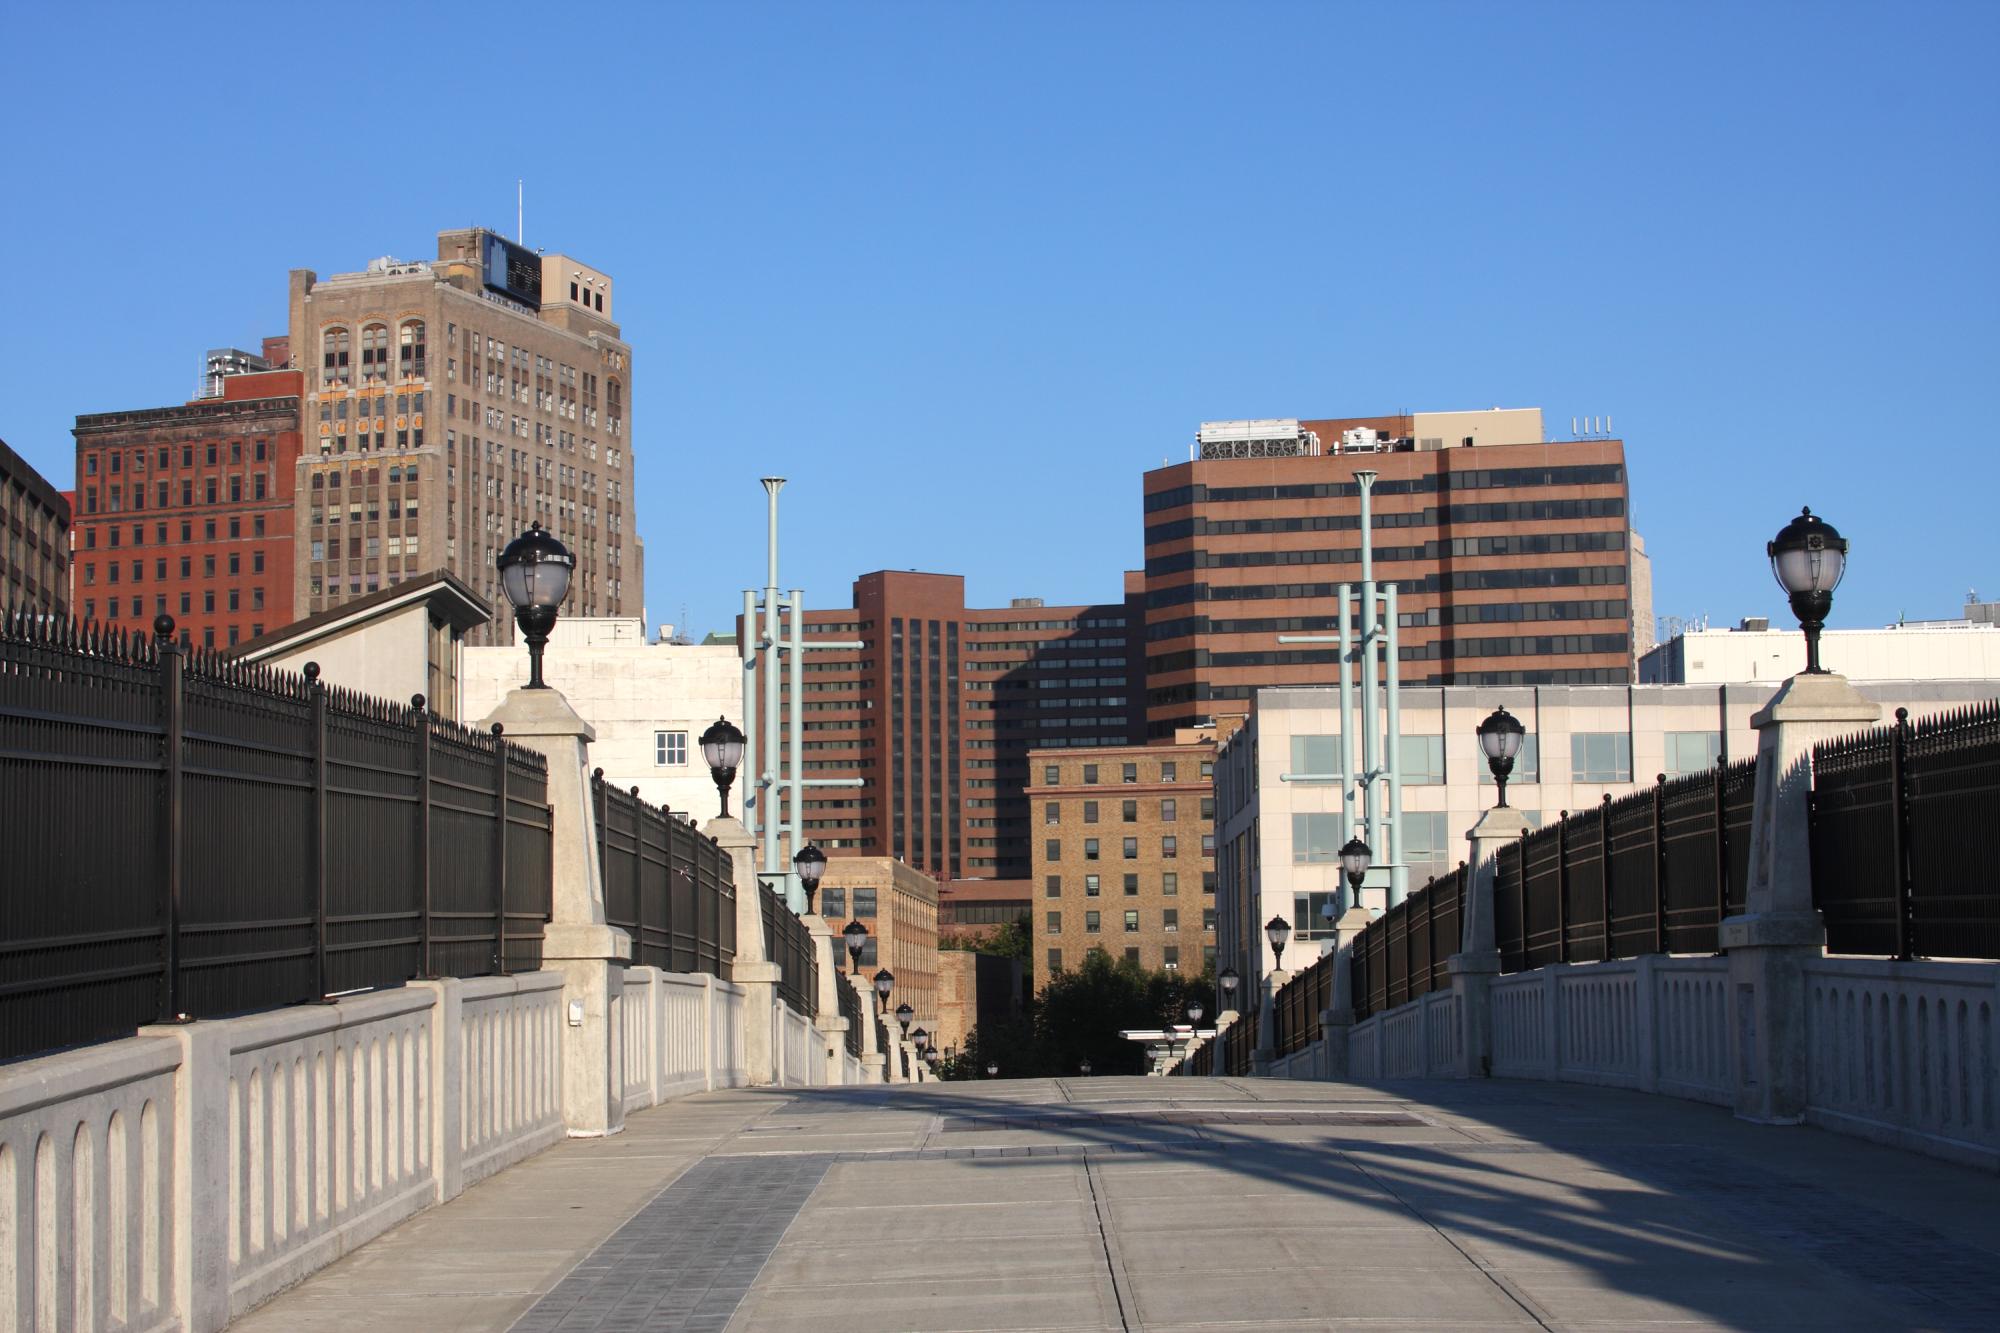 Downtown Albany office buildings as seen from the pedestrian bridge